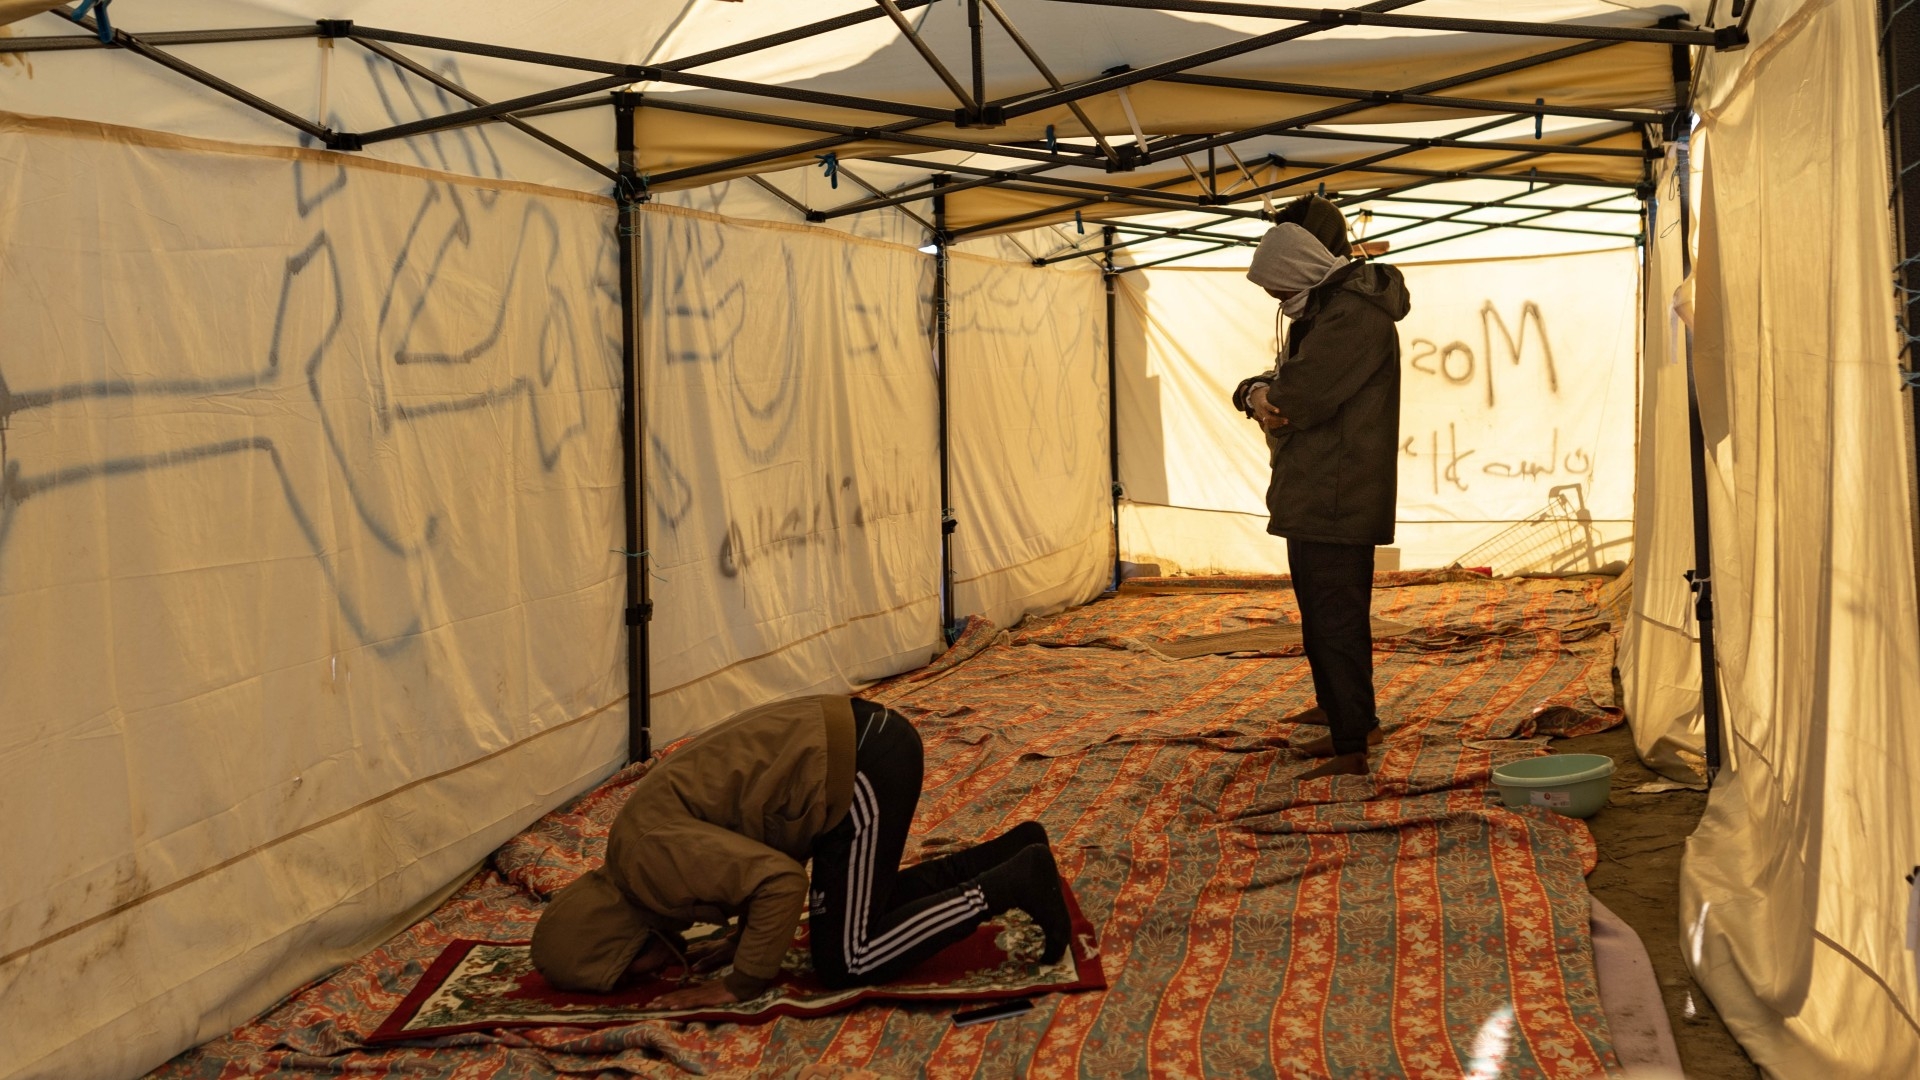 A group of men pray inside the makeshift mosque built in the camp of Grande Synthe, in the forest of Dunkirk, France (MEE/Marta Maroto)